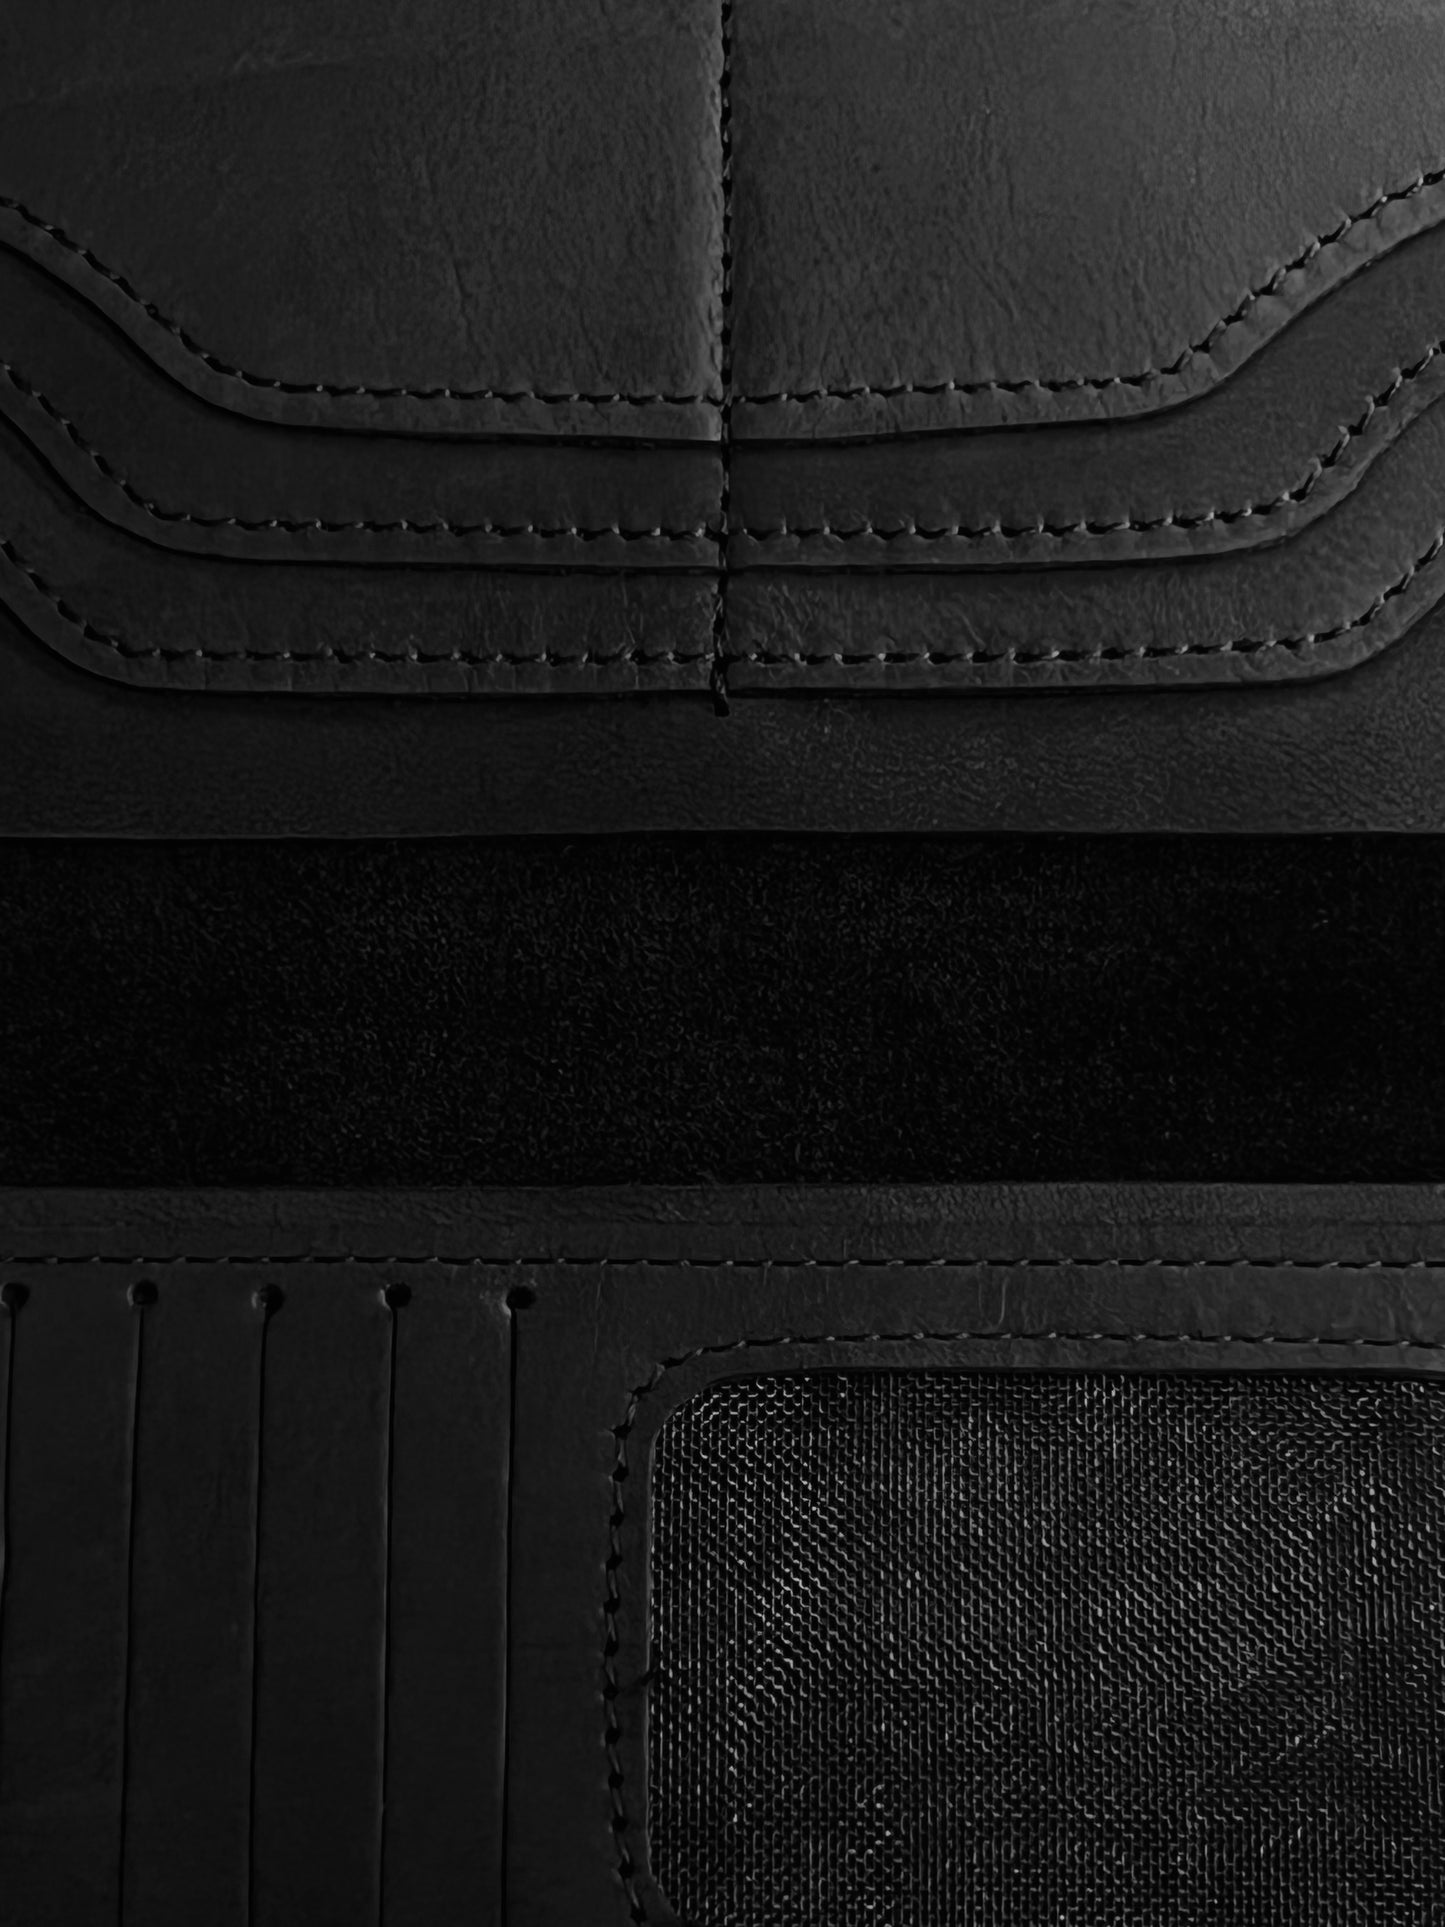 The Black Leather Wallet